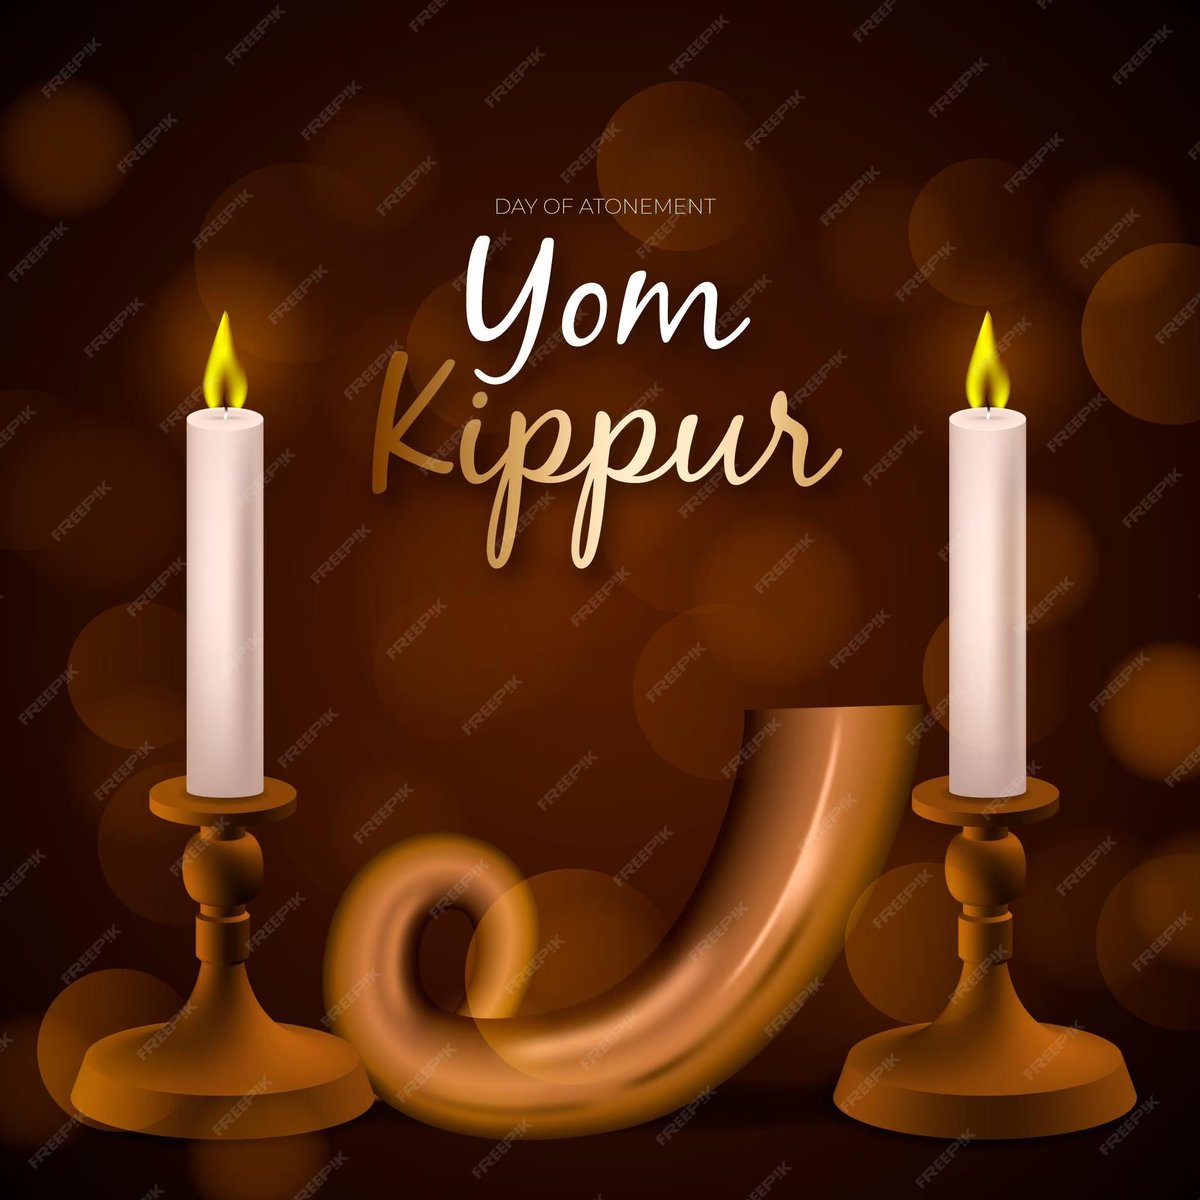 From this evening (Sunday 24th) until tomorrow after nightfall it is the most holiest Jewish day; Yom Kippur. Wishing all observing this time @LDShospcharity @LeedsHospitals @JewishLeeds @Leeds_Childrens @leedsfaithforum G'mar Chatima Tova